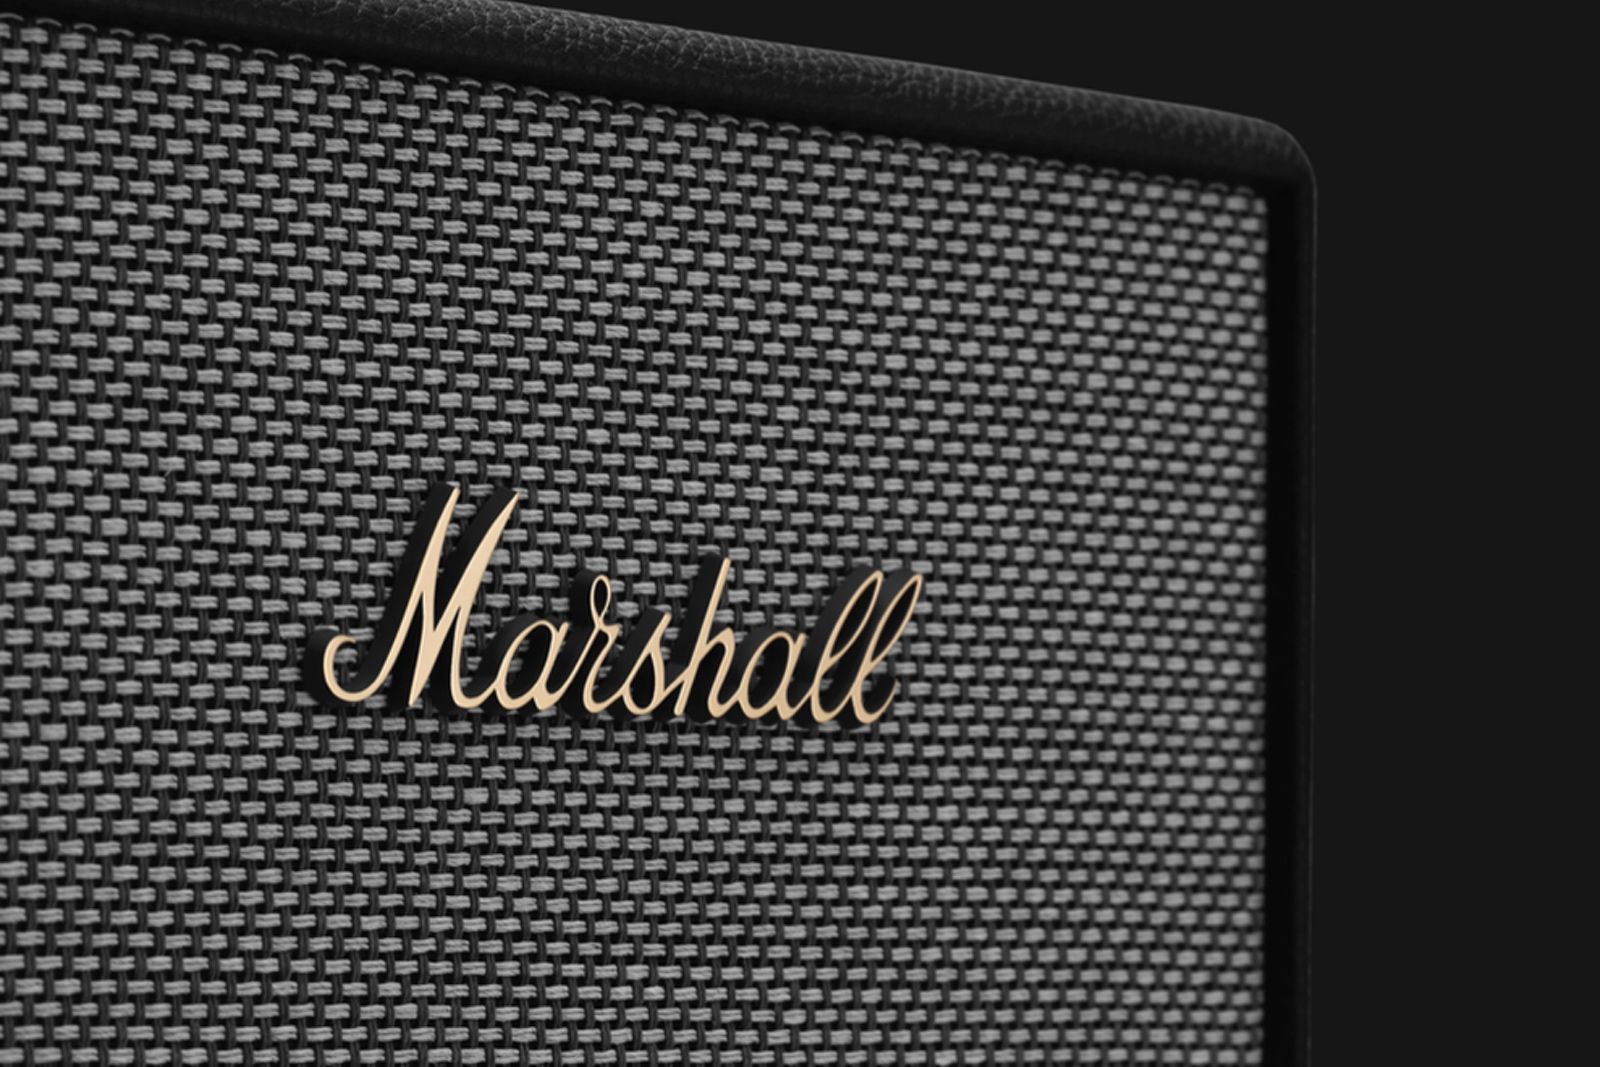 Amazon just restocked the Marshall Acton II smart speaker - act now and pick one up for $130 off photo 1